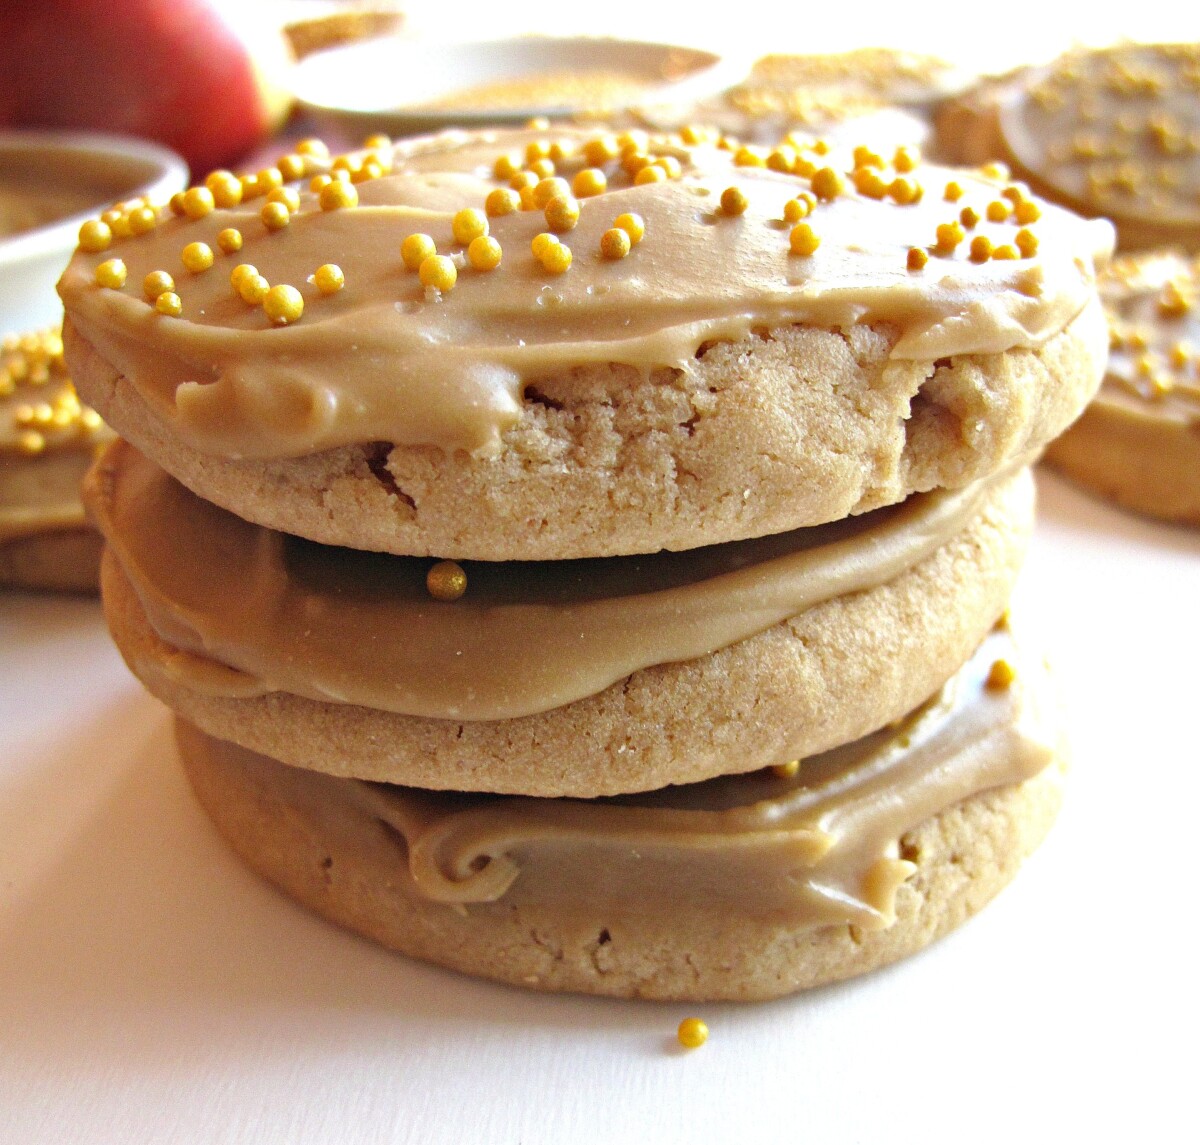 Stack of 3 cookies from the side to show the thickness of the caramel iced cookies.